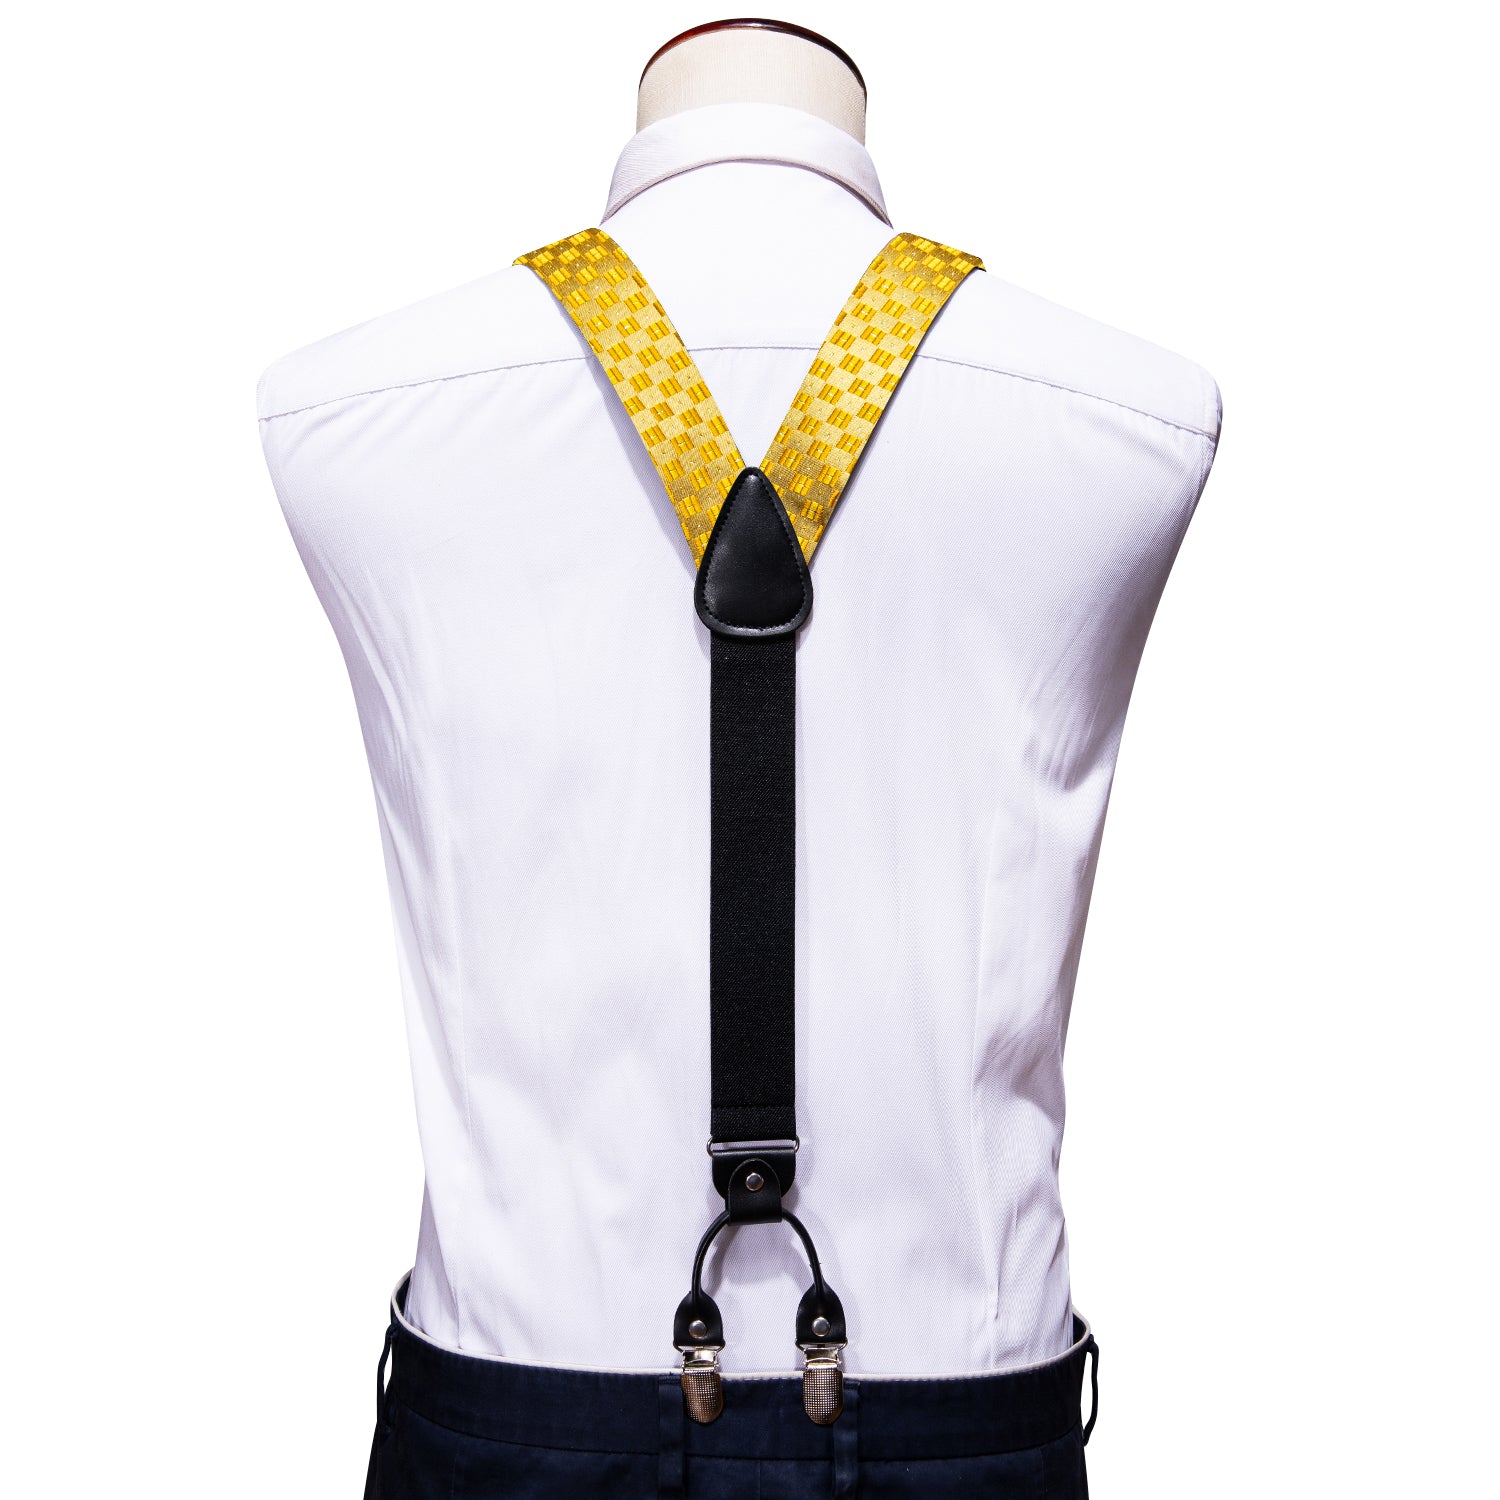 Barry.wang Gold Tie Yellow Plaid Y Back Adjustable Bow Tie Suspenders Set